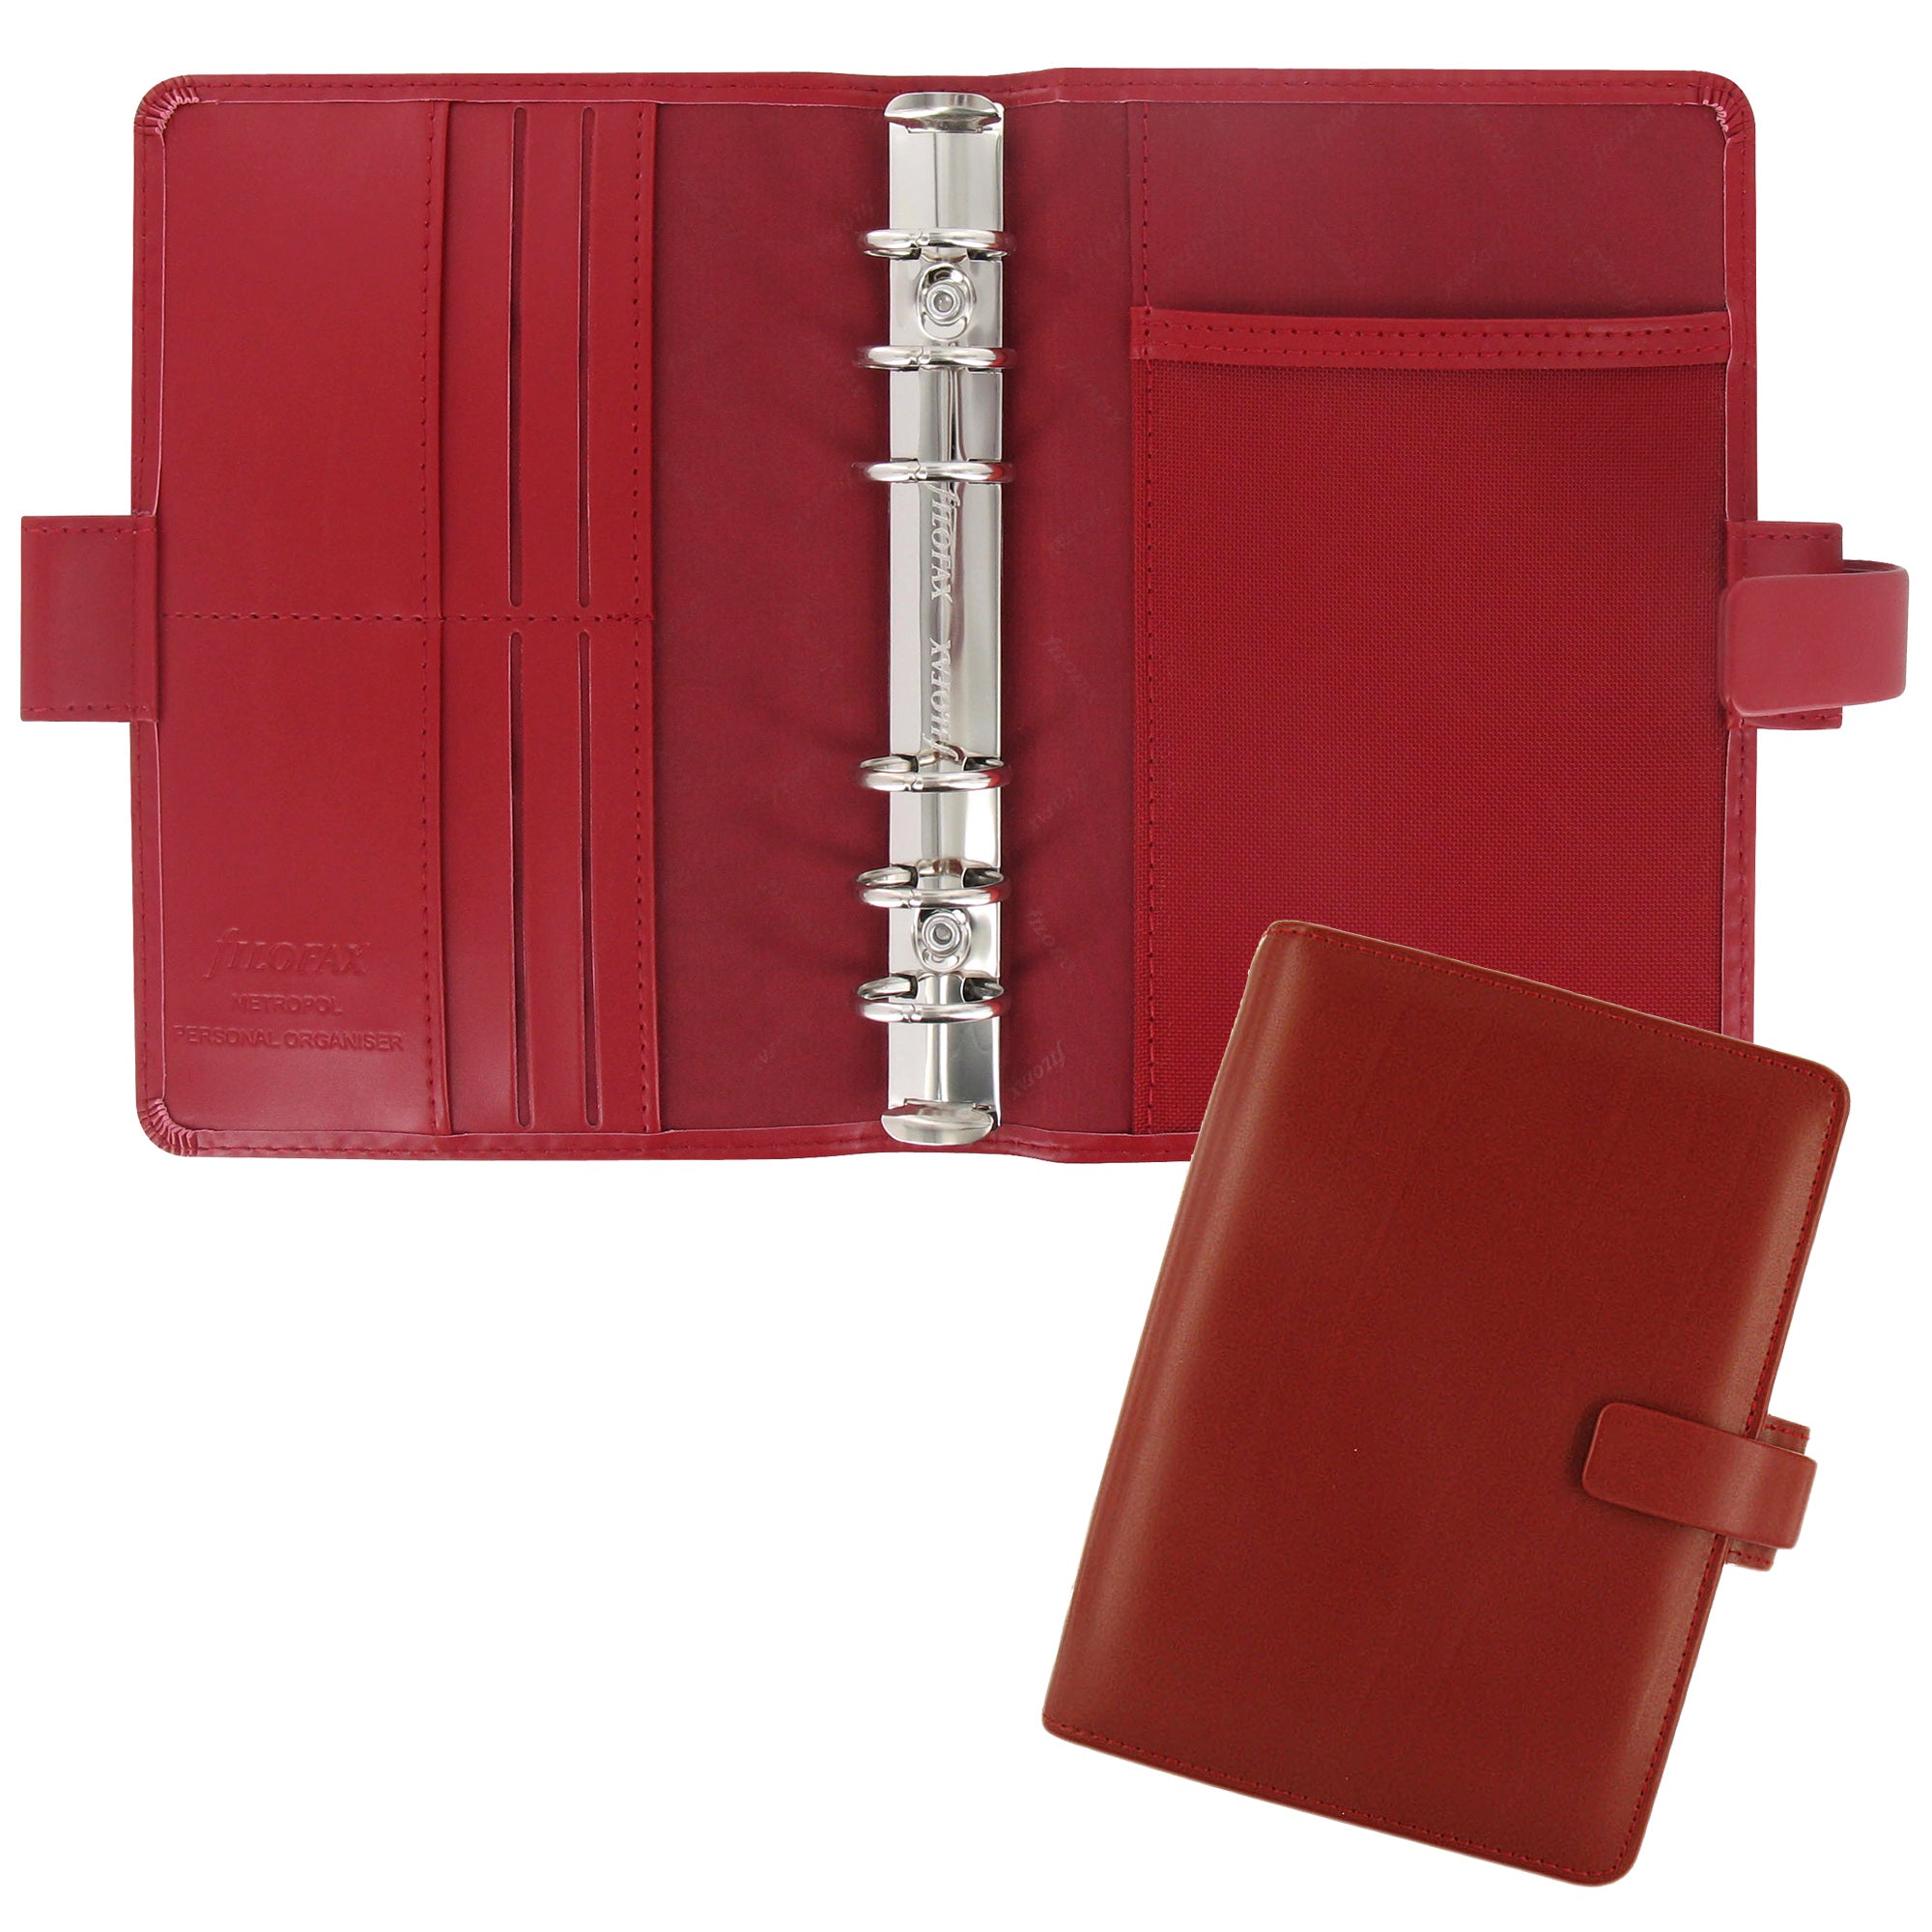 filofax-organiser-metropol-personal-f-to-188x135x38mm-rosso-similpelle